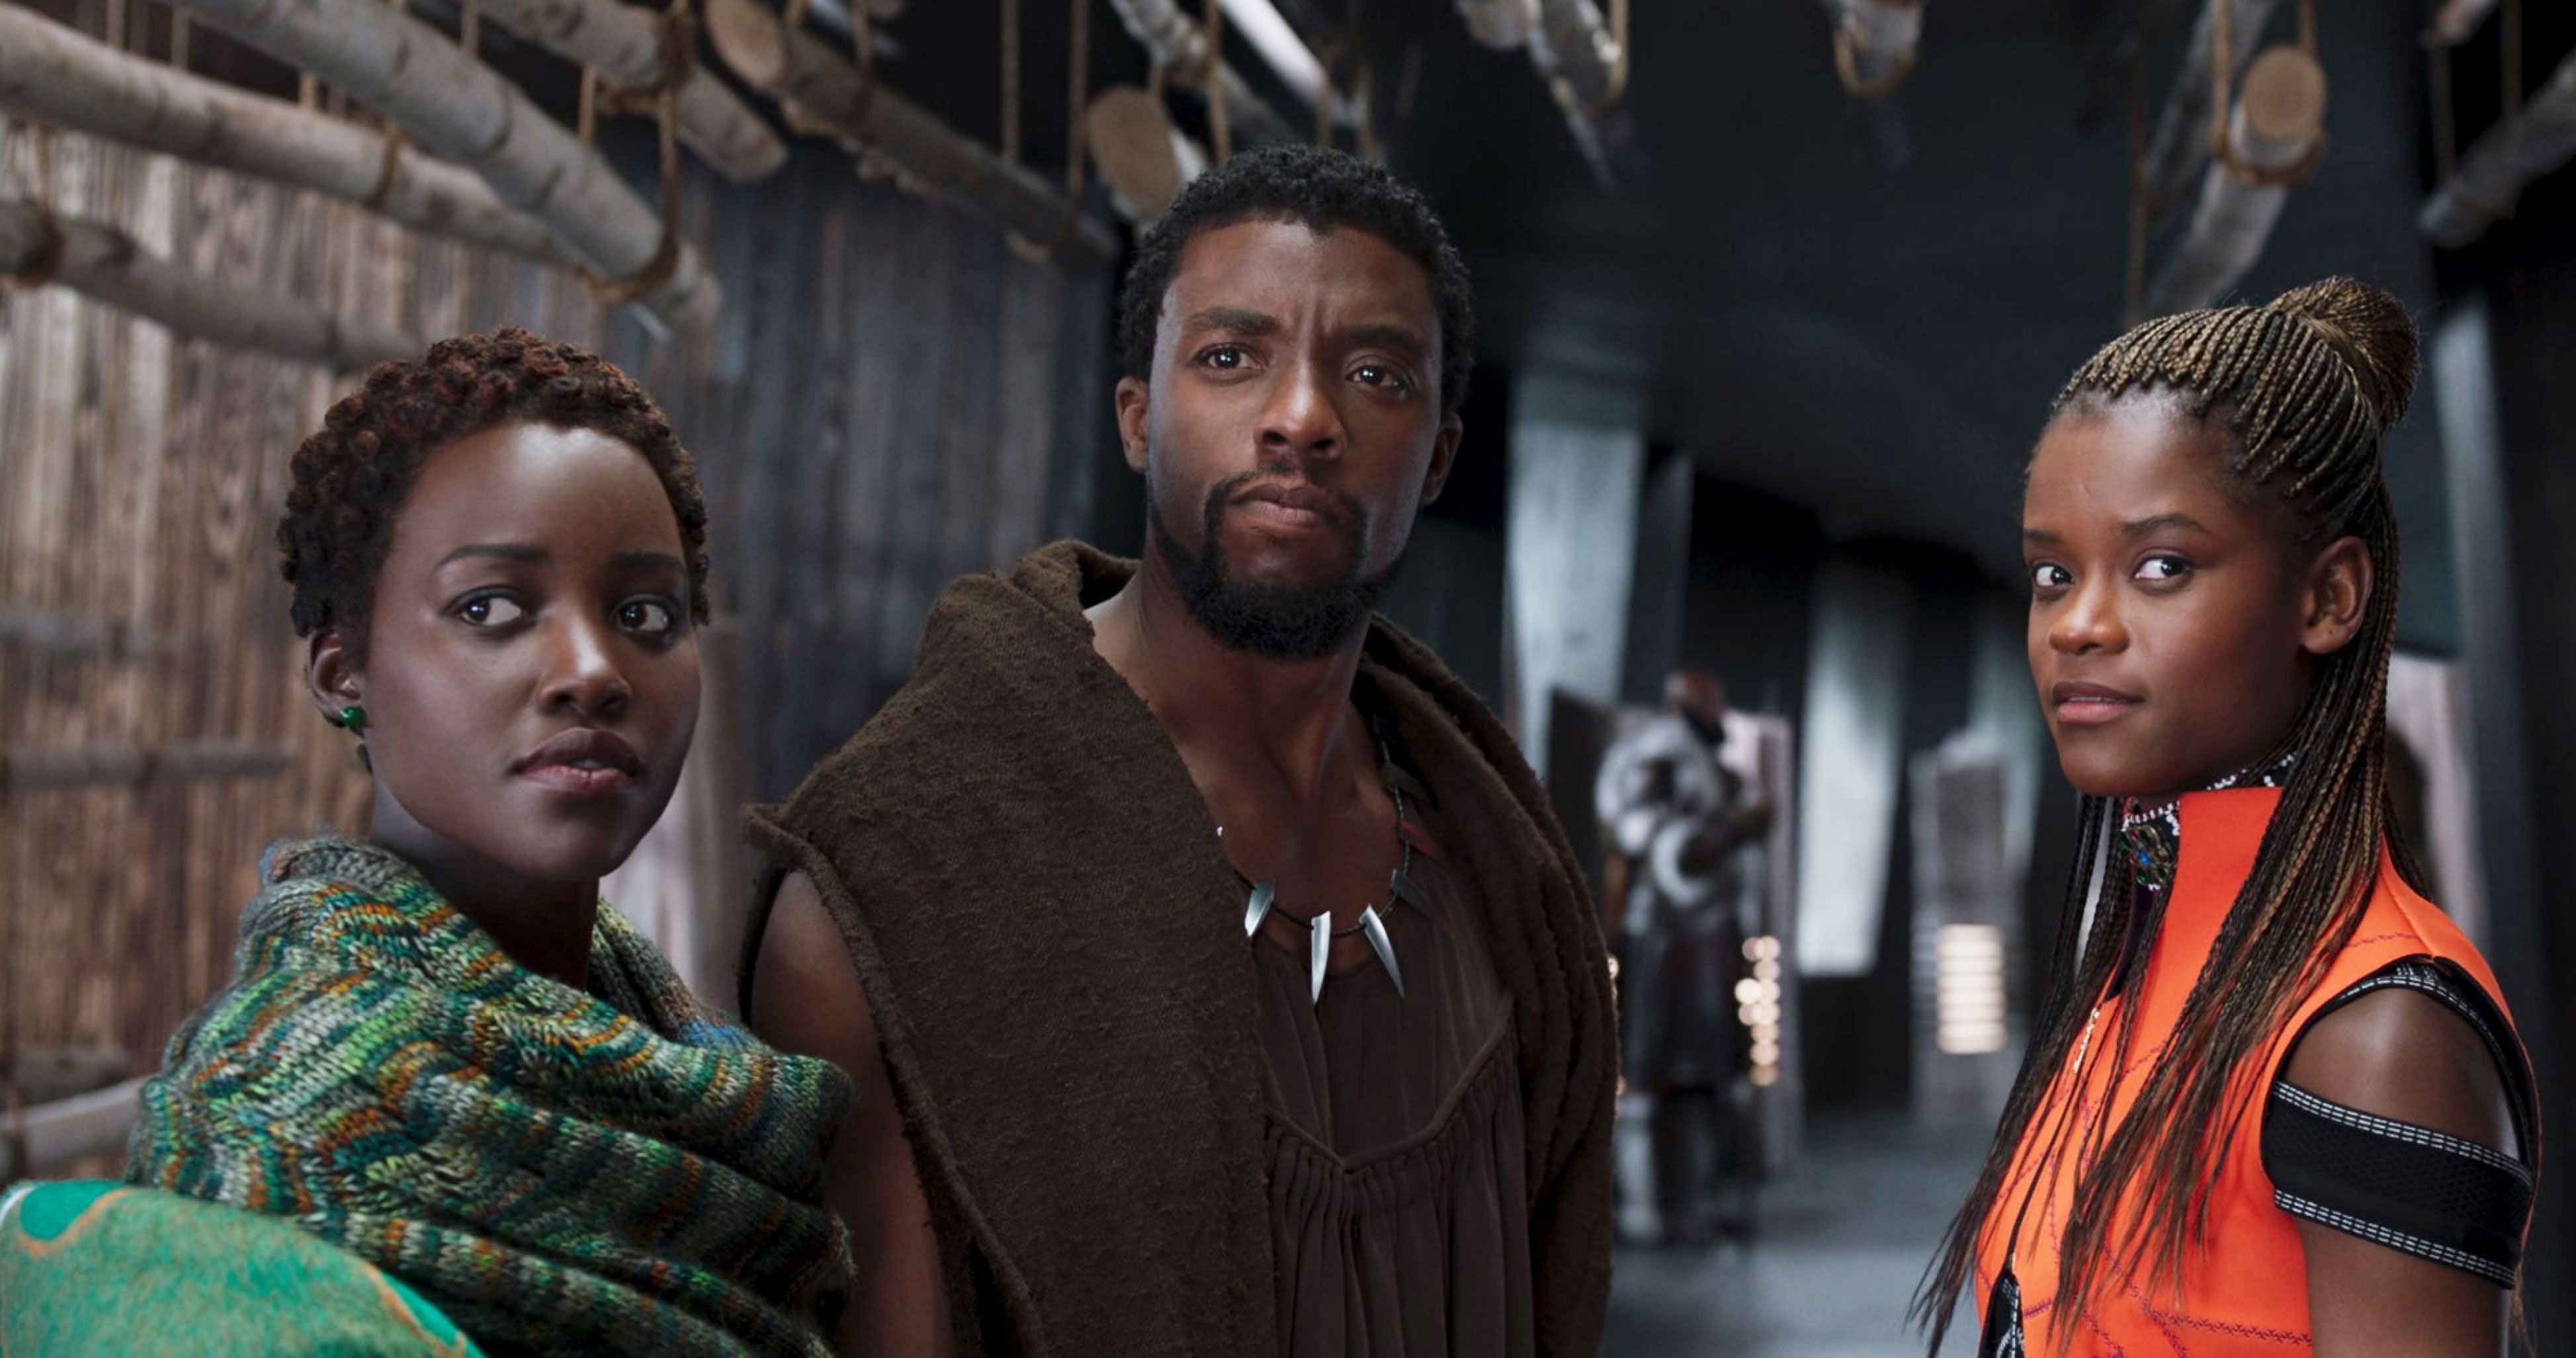 Watch this Incredibly Potent Deleted Black Panther Scene - The Credits